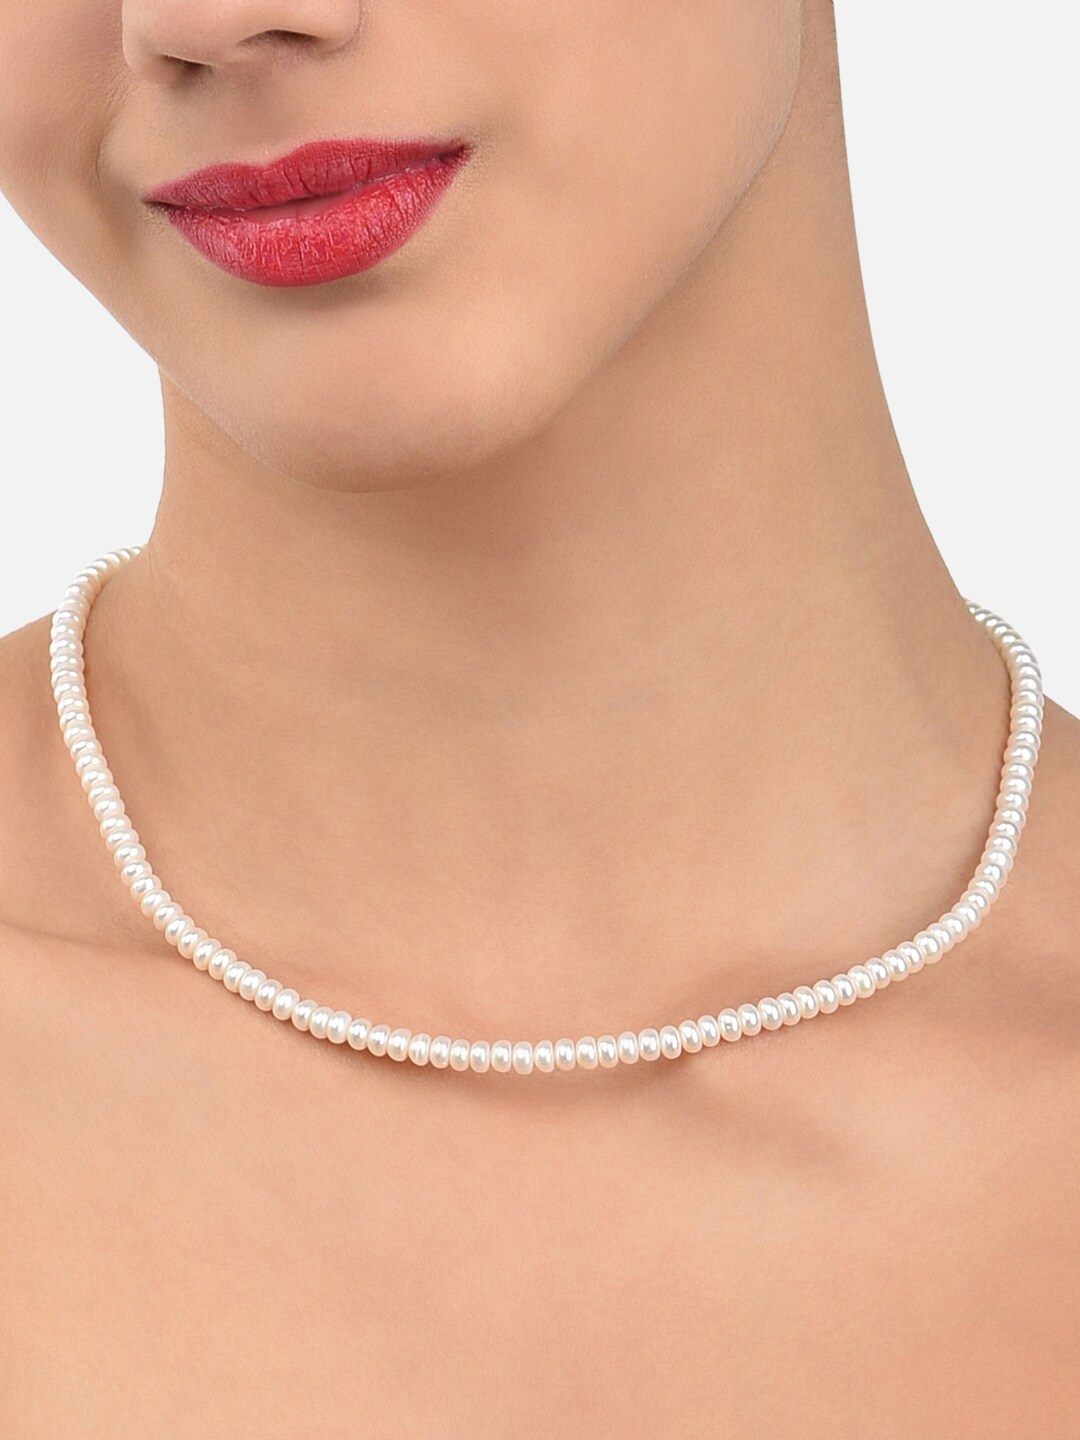 Zaveri Pearls Fresh Water Button Pearls 4-5mm AAA+ Quality Necklace Price in India